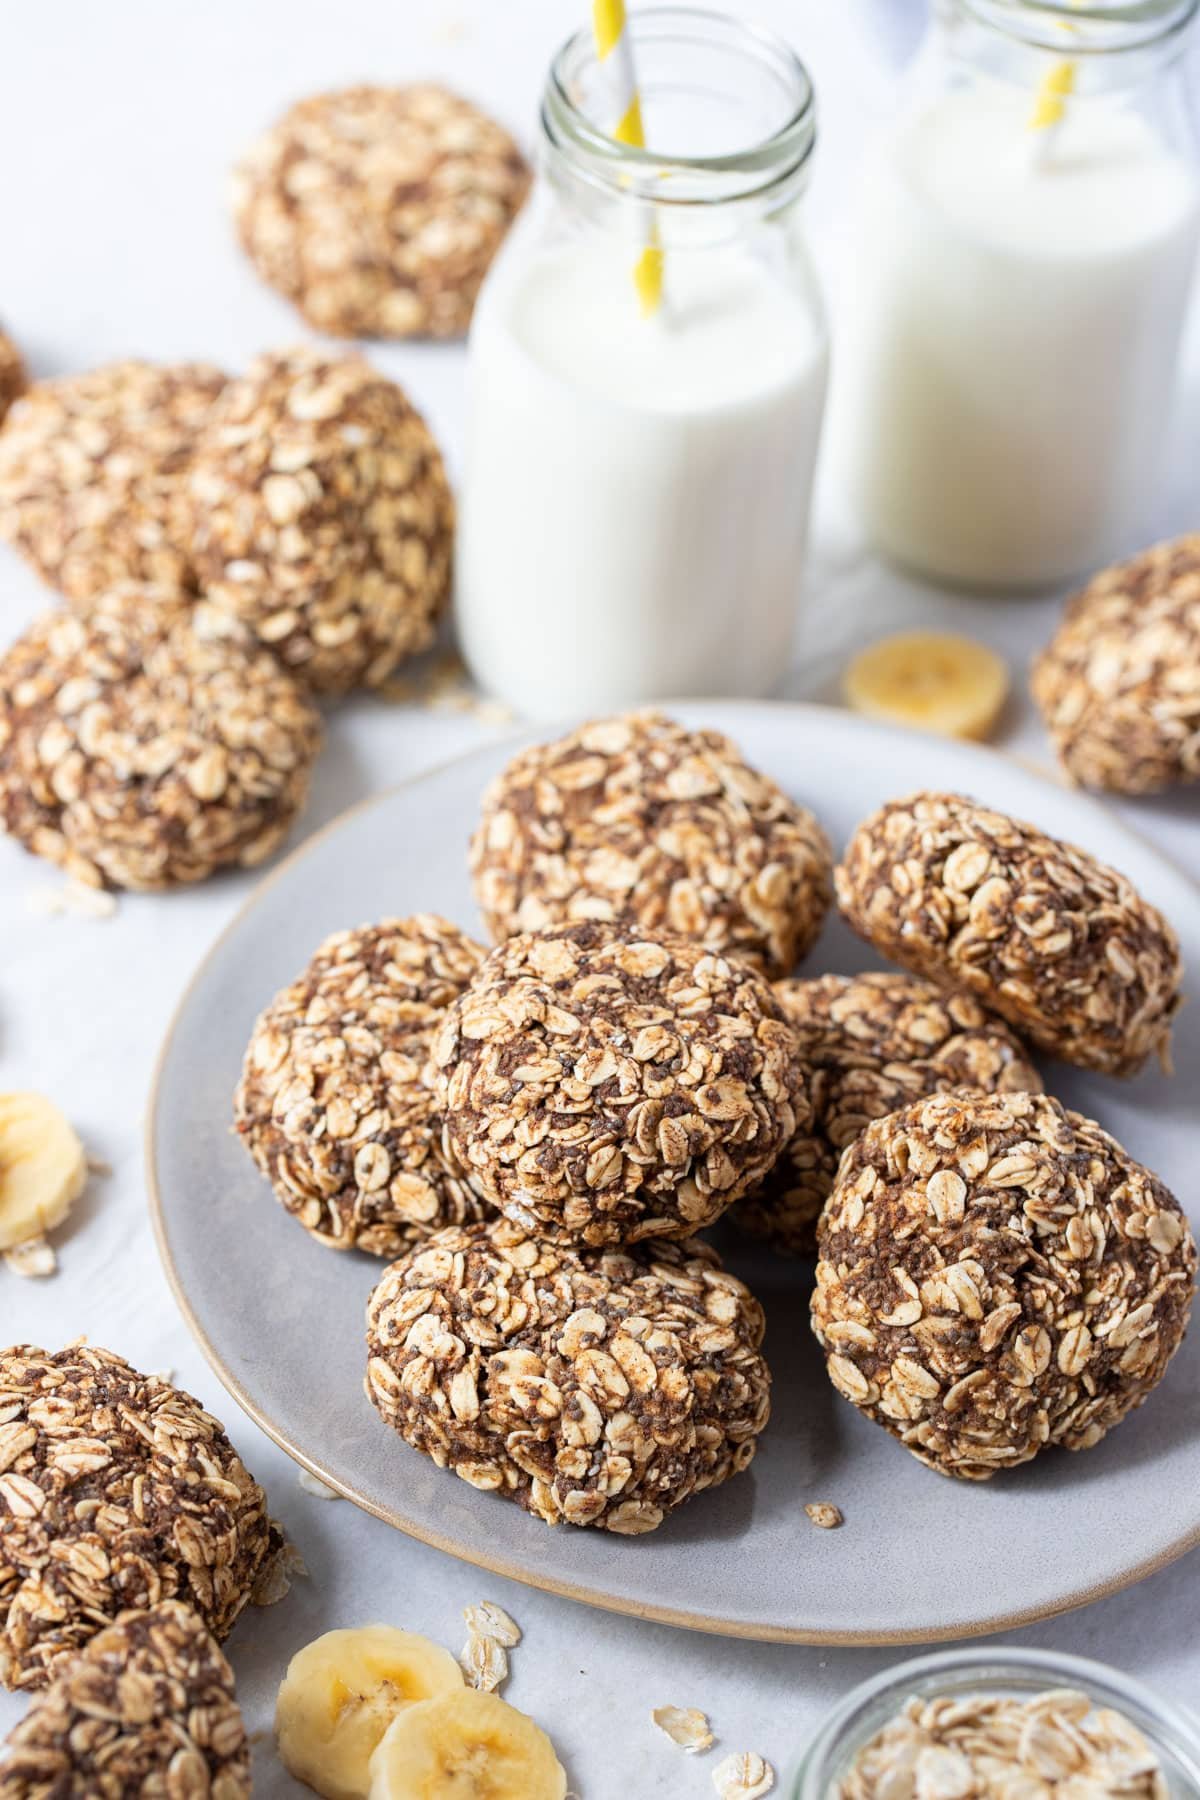 oat cookies on a plate with bottles of milk and slices of banana.